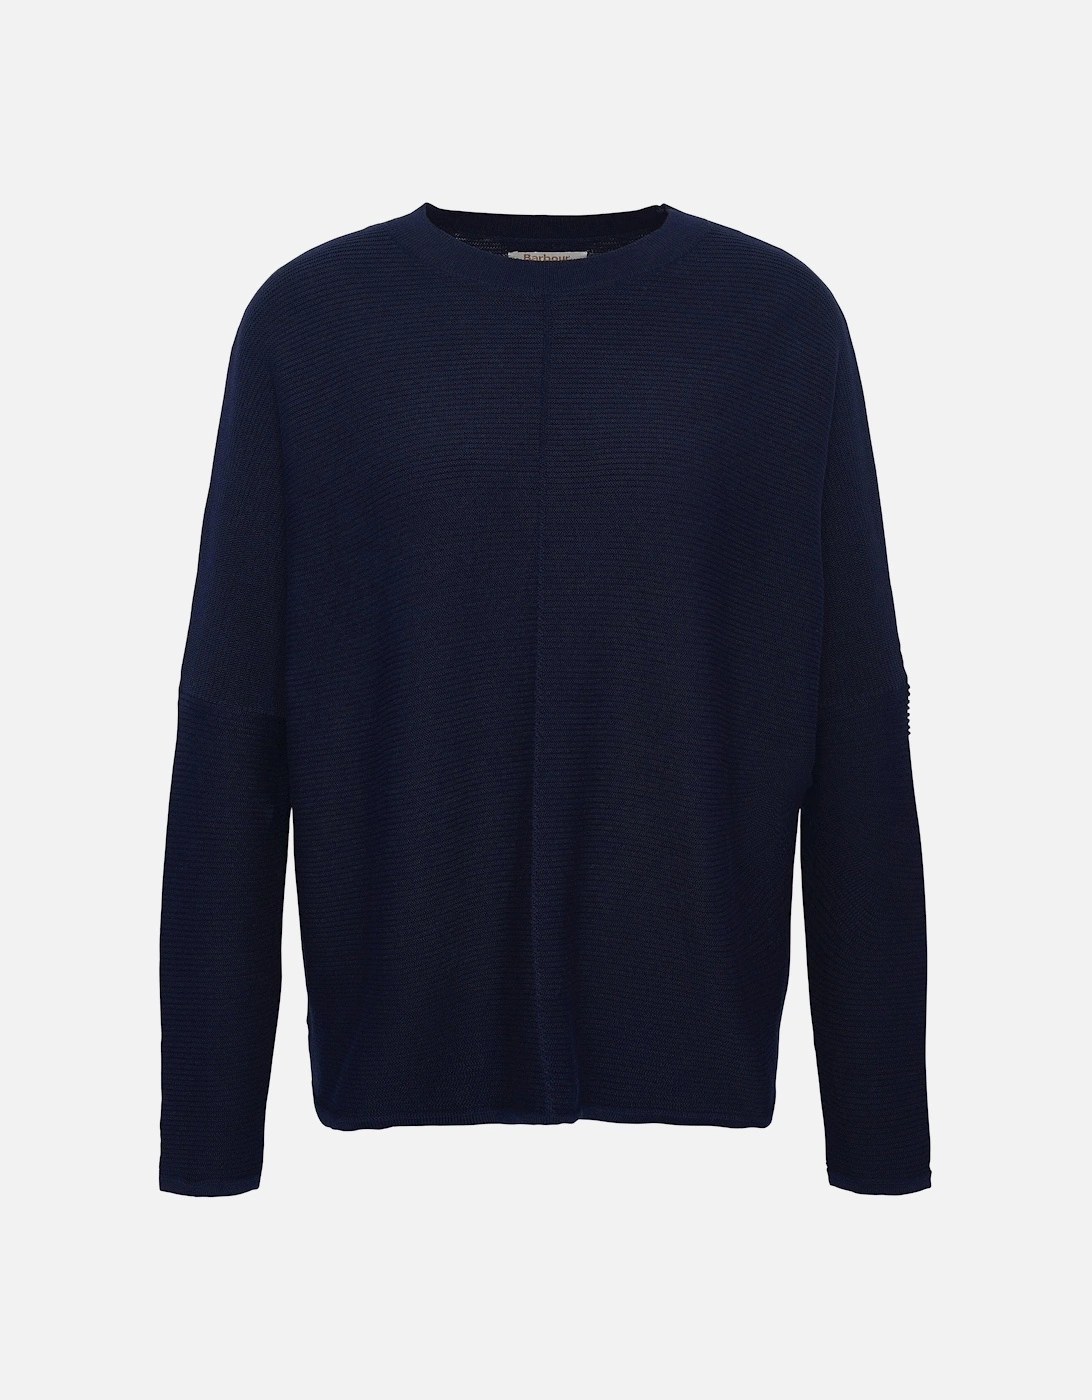 Bickland Womens Knitted Jumper